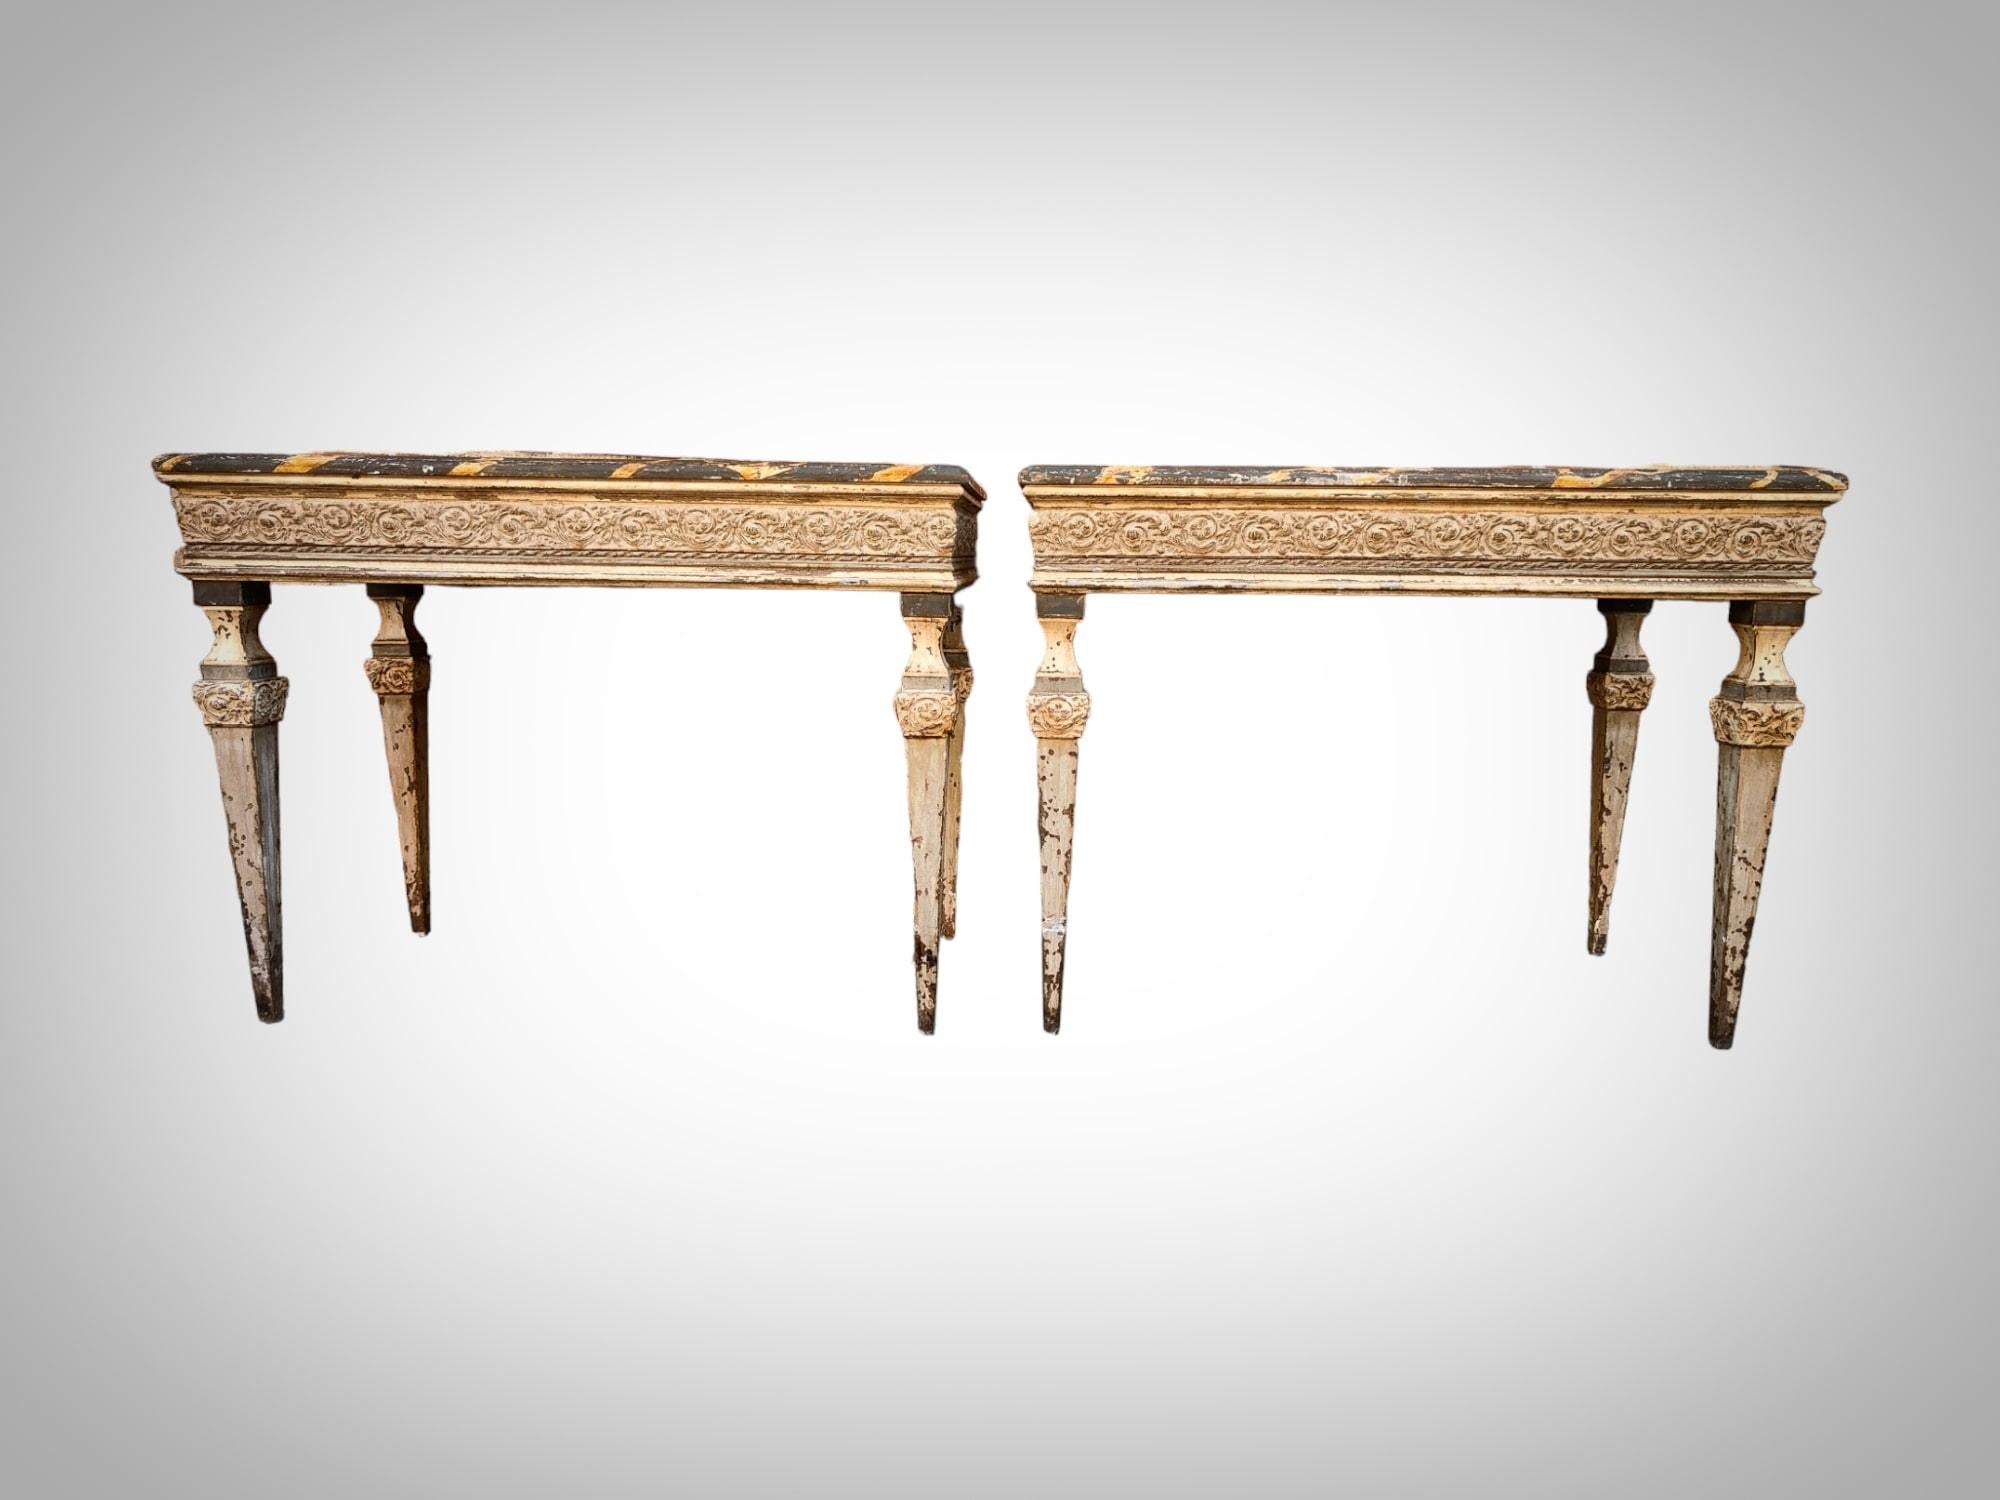 
Title:
Pair of 20th Century Italian Consoles: Carved and Polychromed Elegance

Description:

Immerse yourself in the sophistication of the 20th century with this pair of Italian consoles, an elegant expression of Italian craftsmanship. Carved and